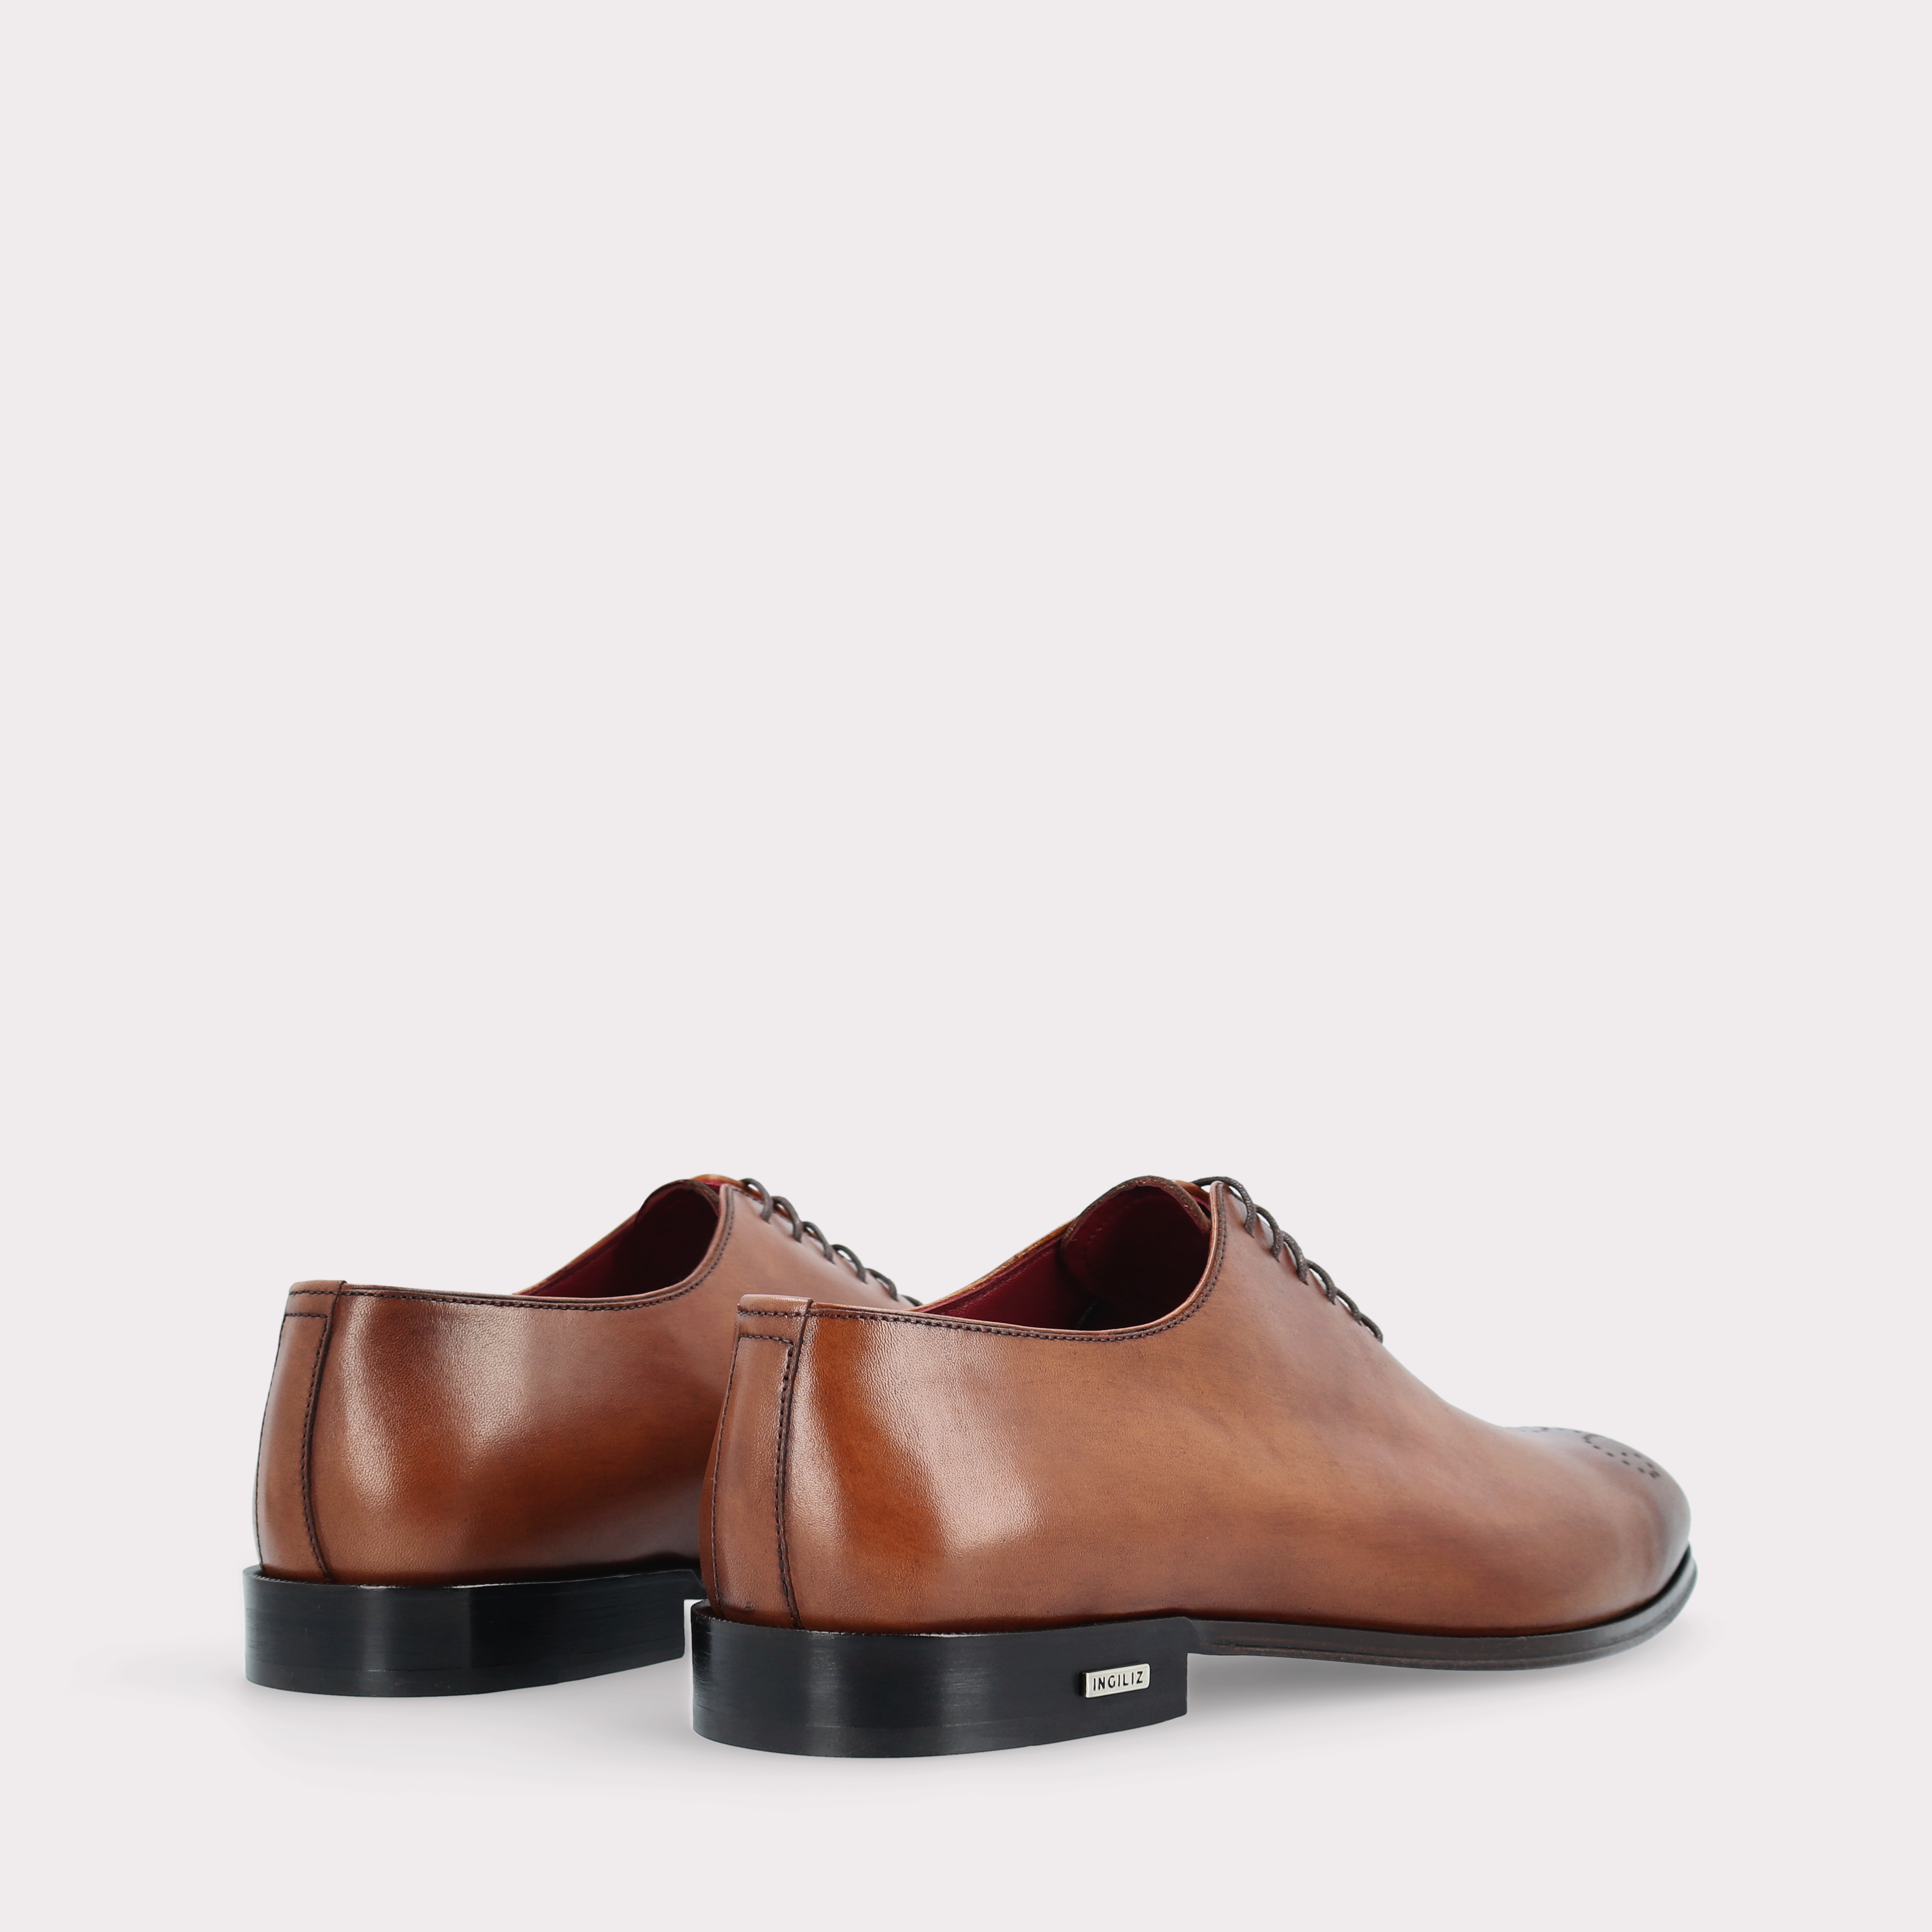 PRATO 01 brown leather oxford shoes